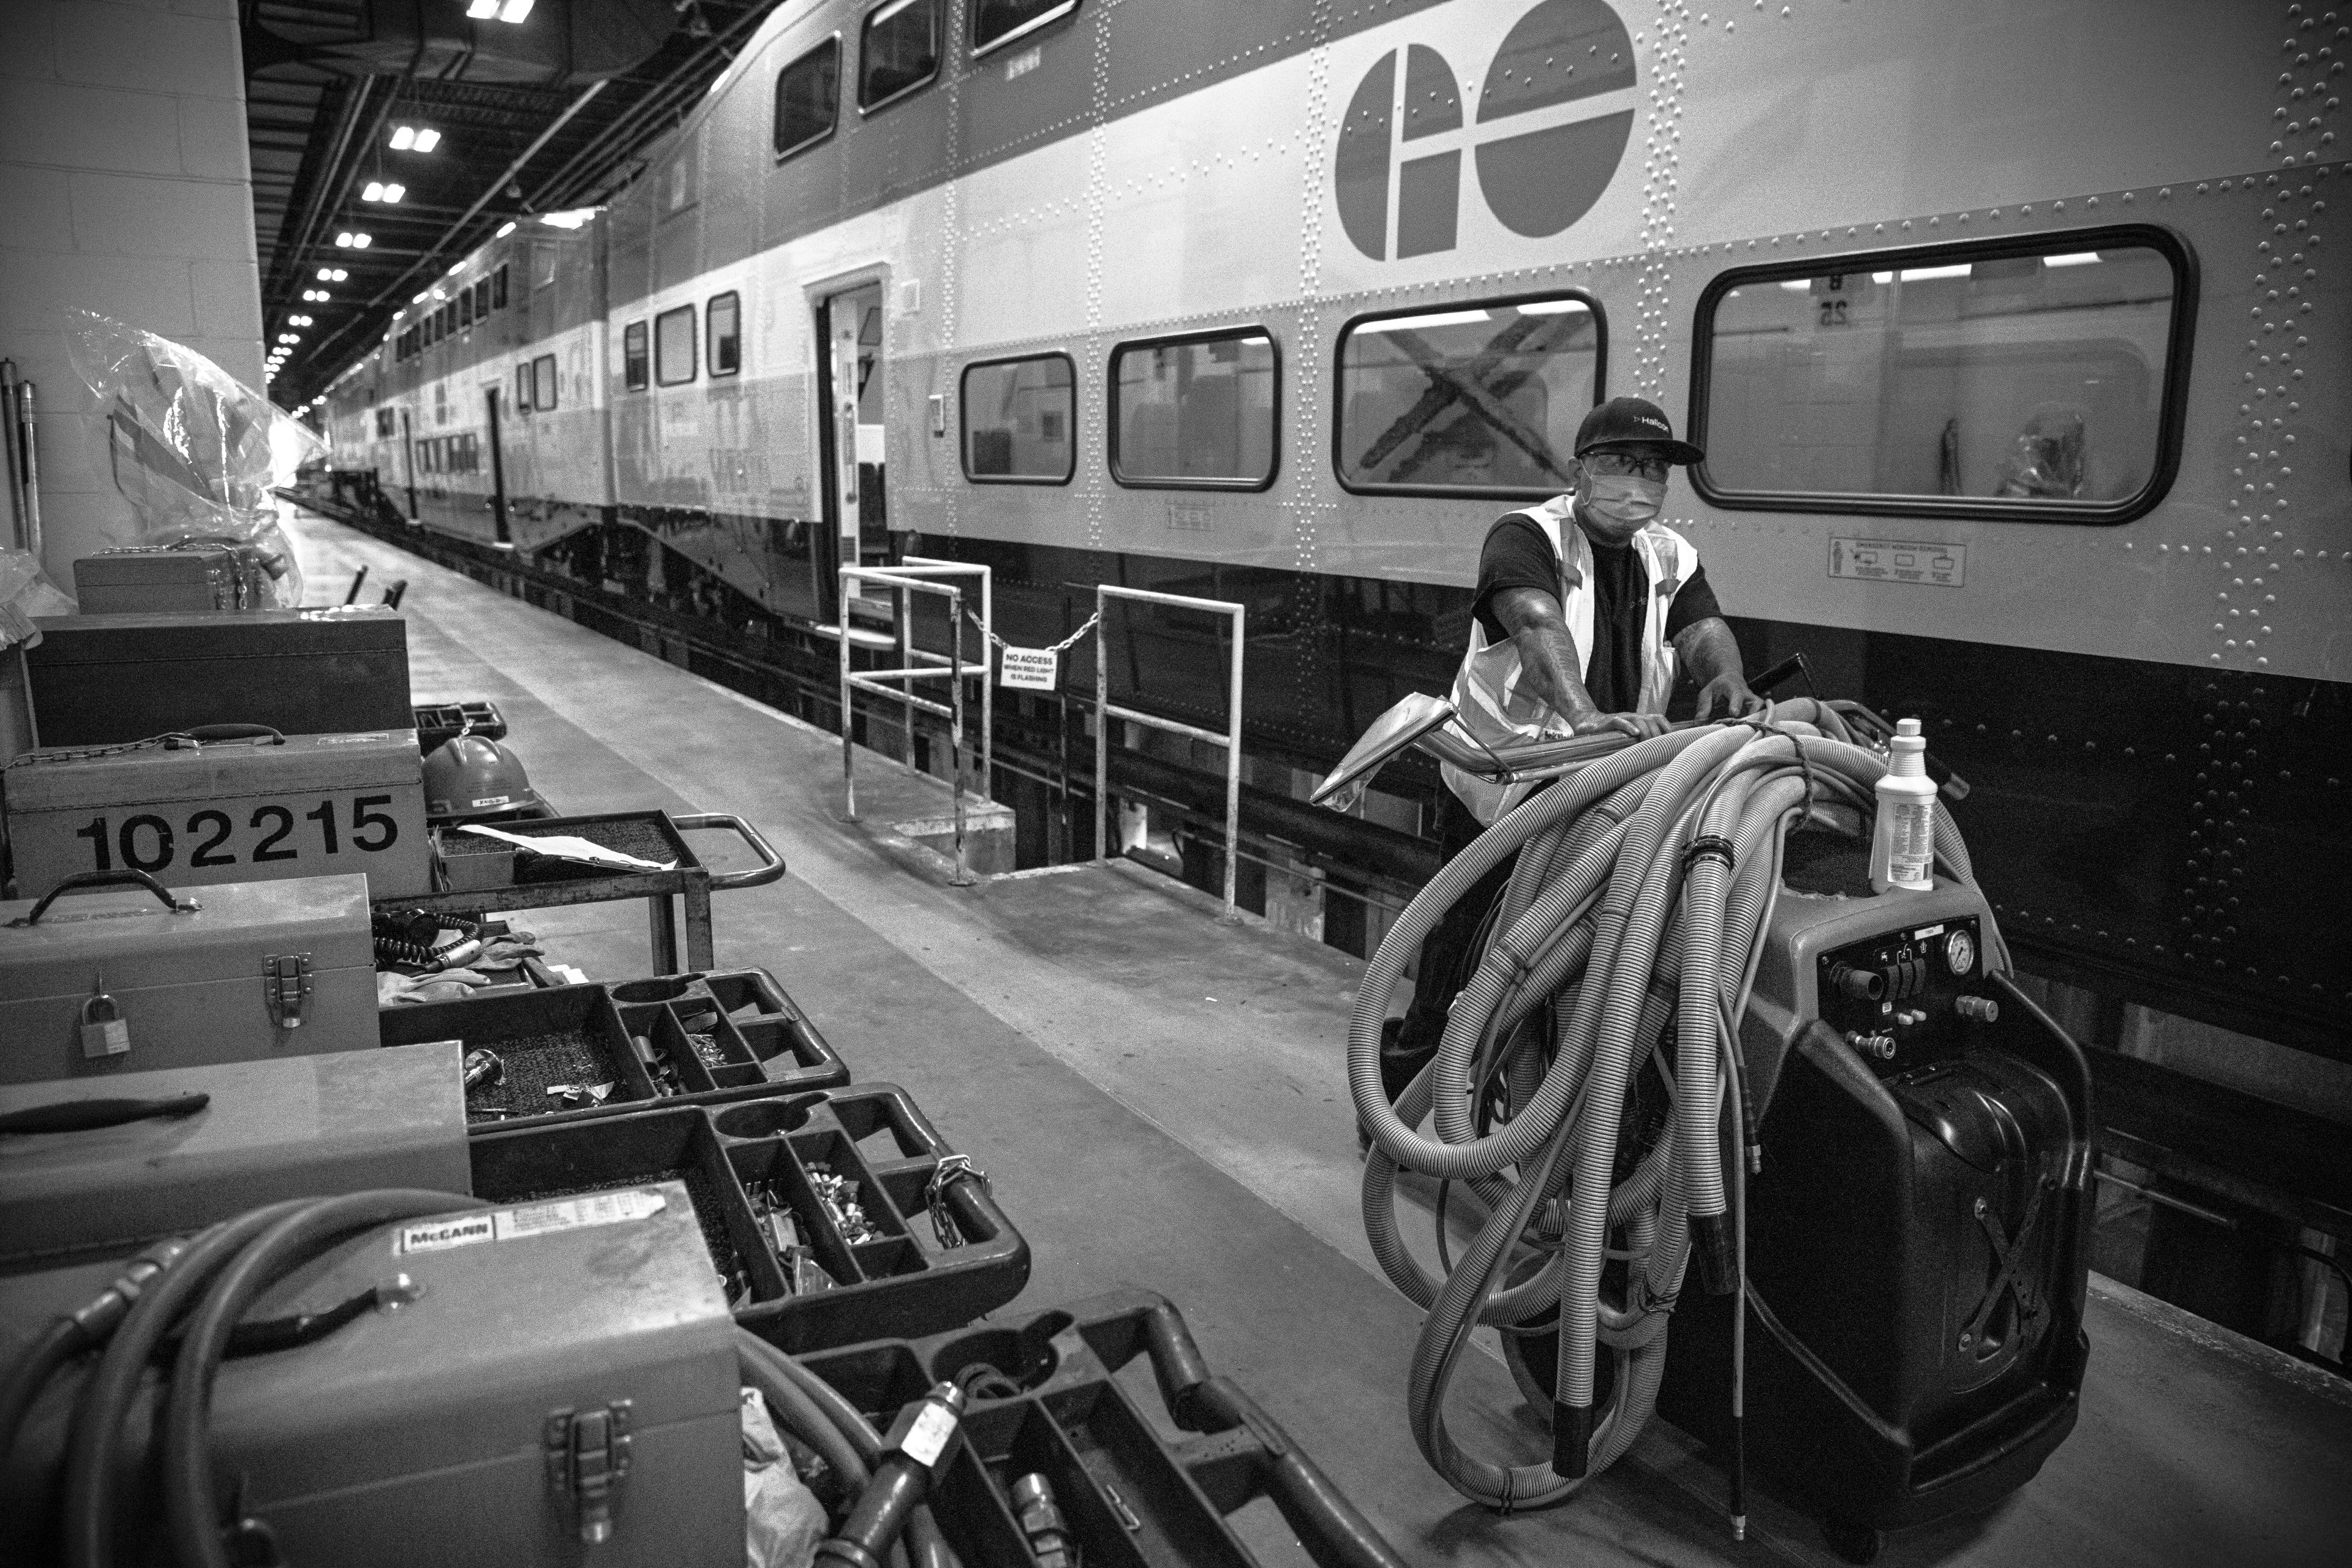 A worker carries cleaning tools next to a train.